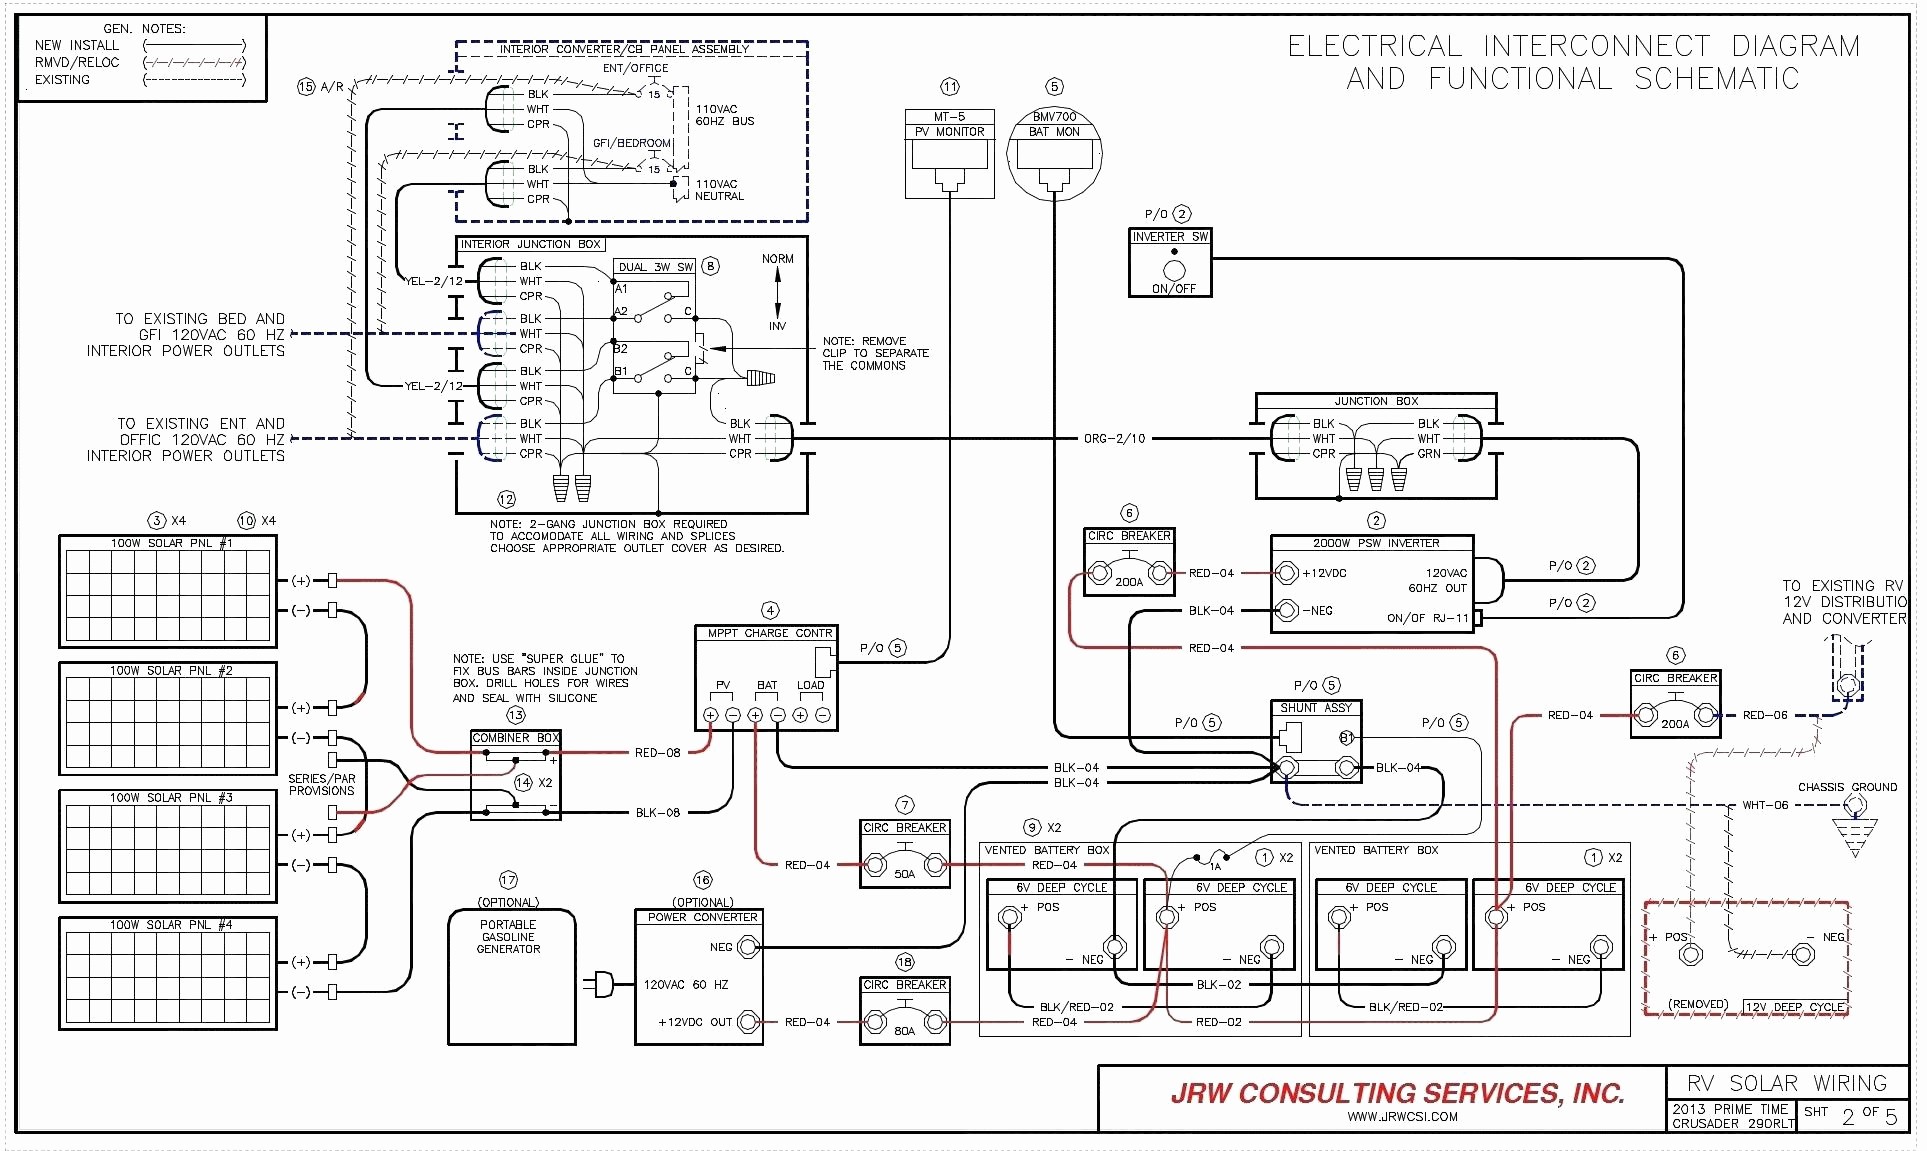 Duo therm thermostat Wiring Diagram Best Duo therm Rv Air Conditioner Wiring Diagram Duo therm thermostat